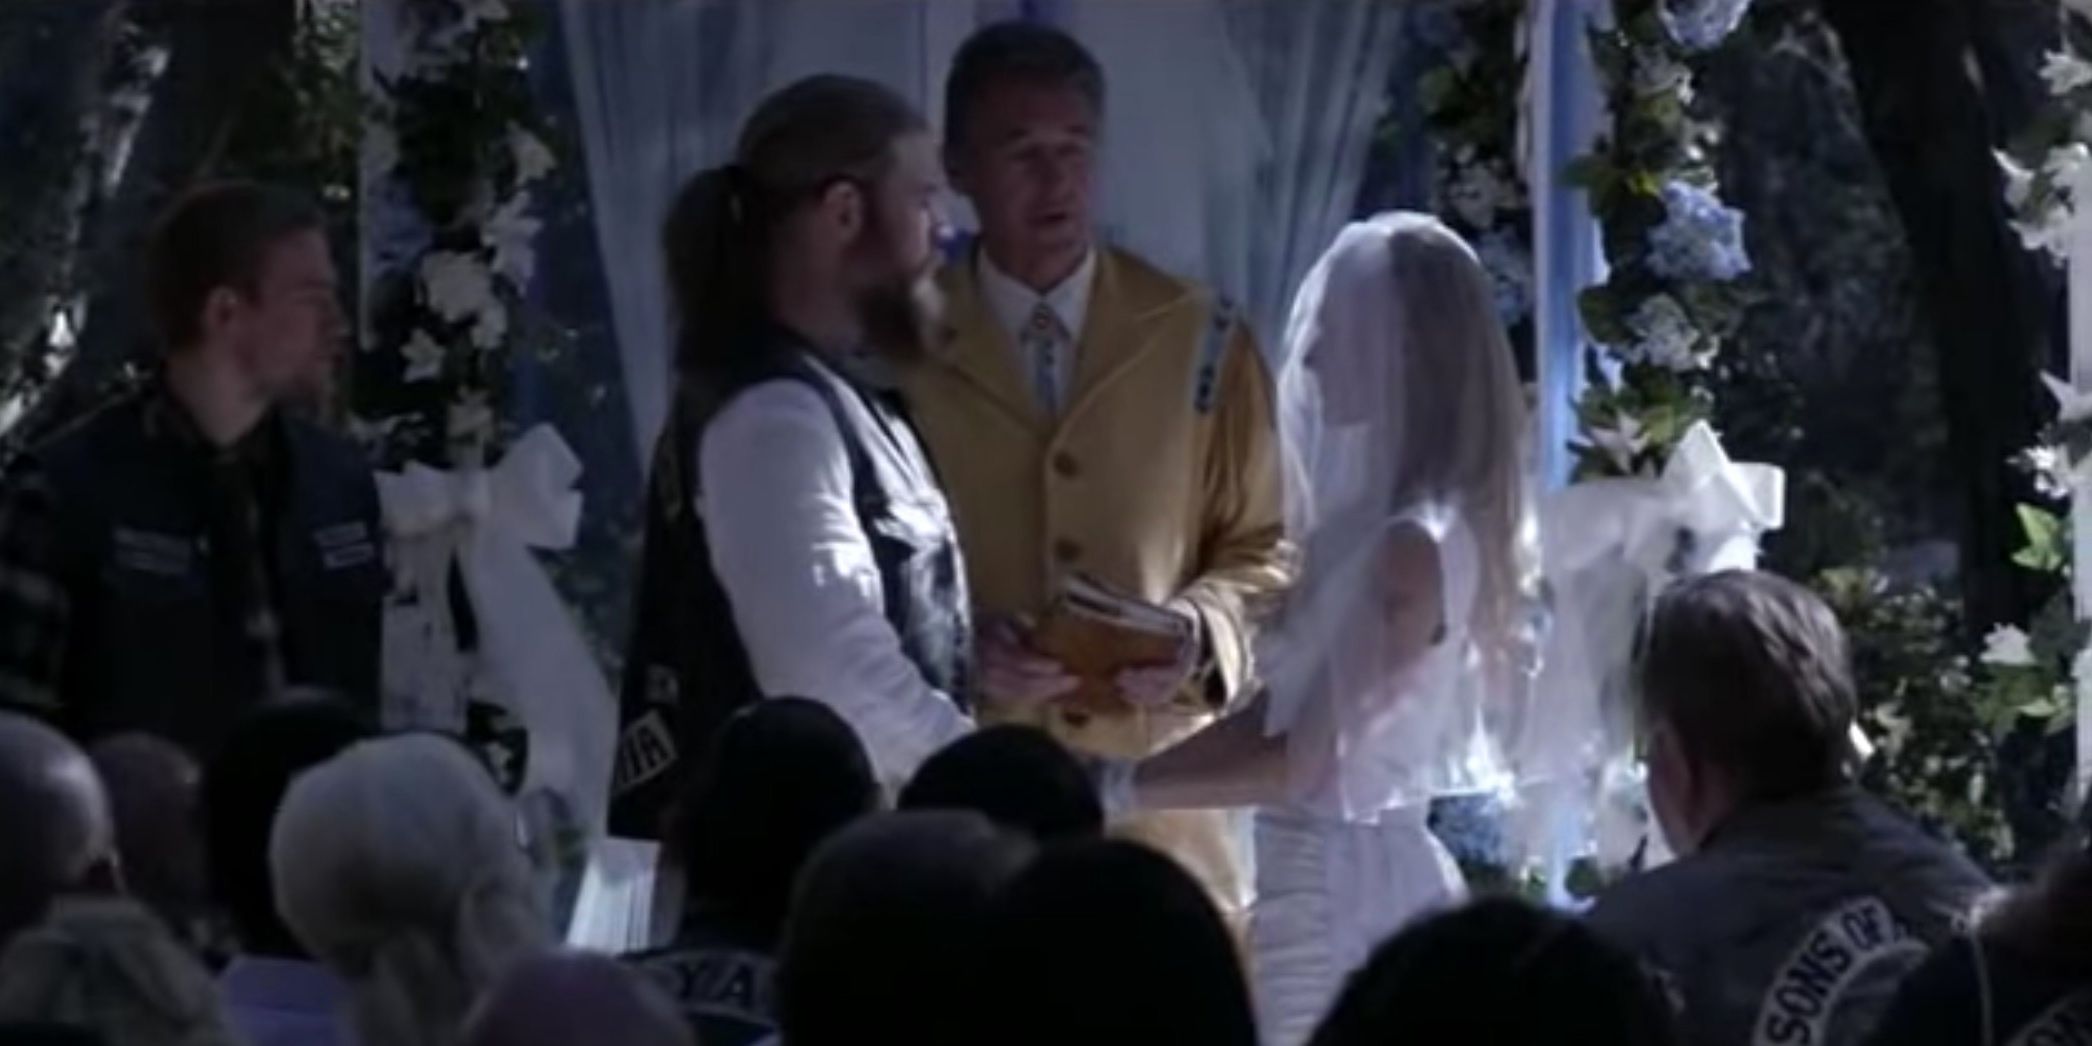 OPIE AND LYLA'S WEDDING SONS OF ANARCHY